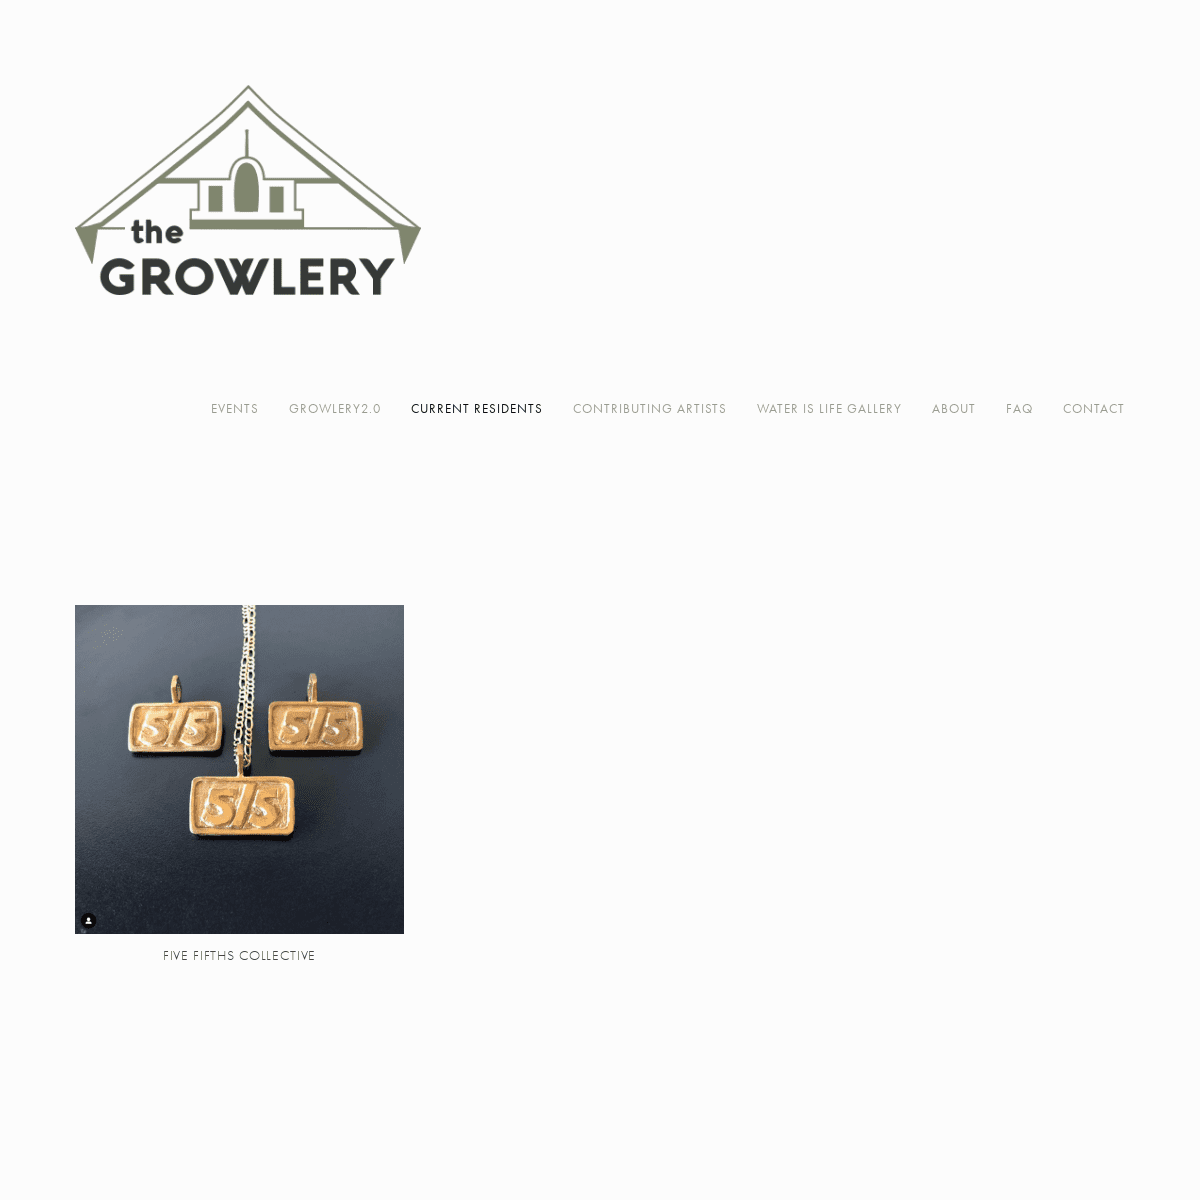 A complete backup of thegrowlery.org